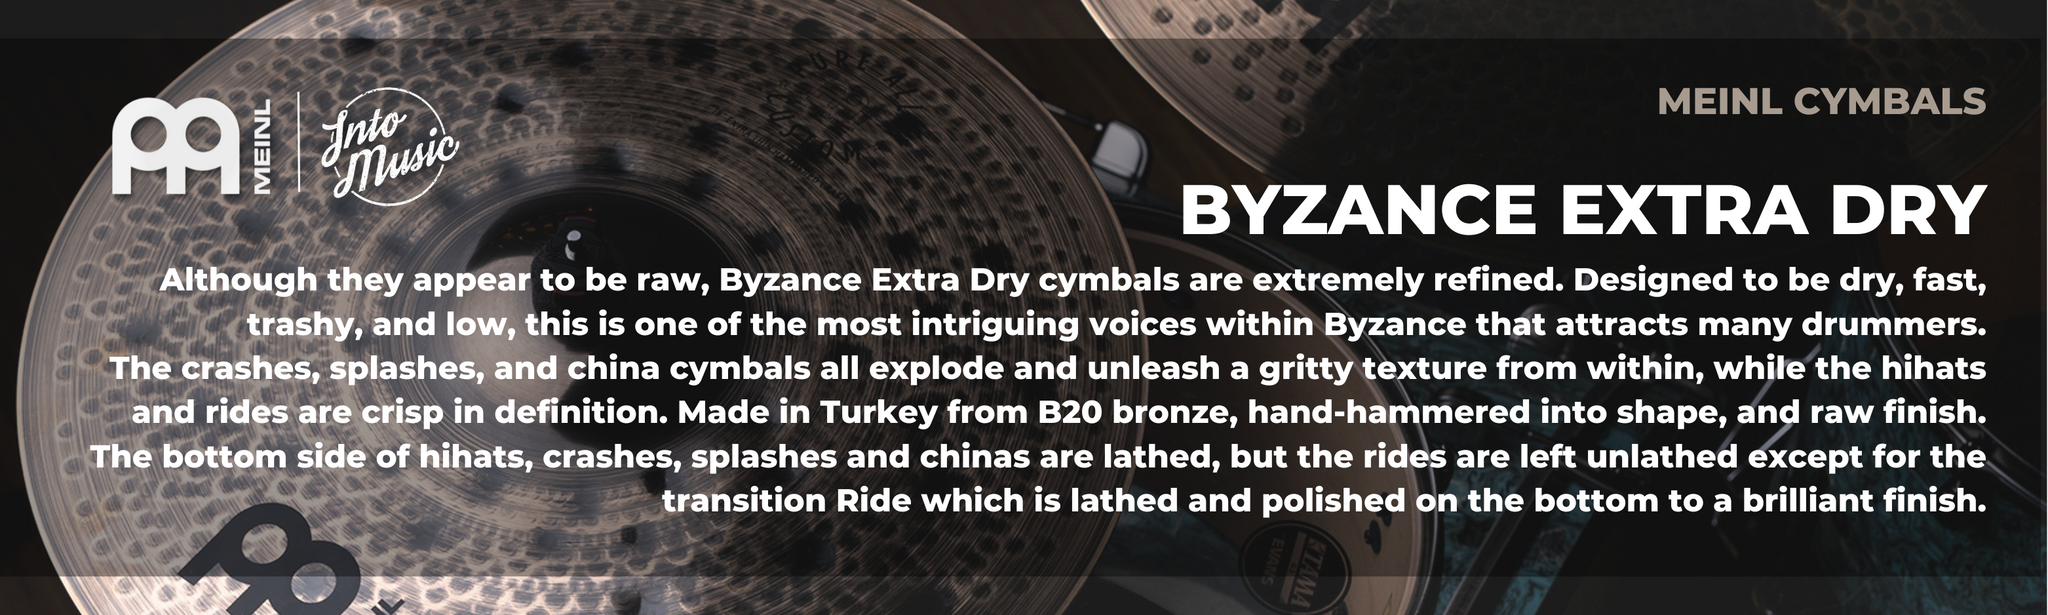 Byzance Extra Dry Cymbals At Into Music – Into Music Store